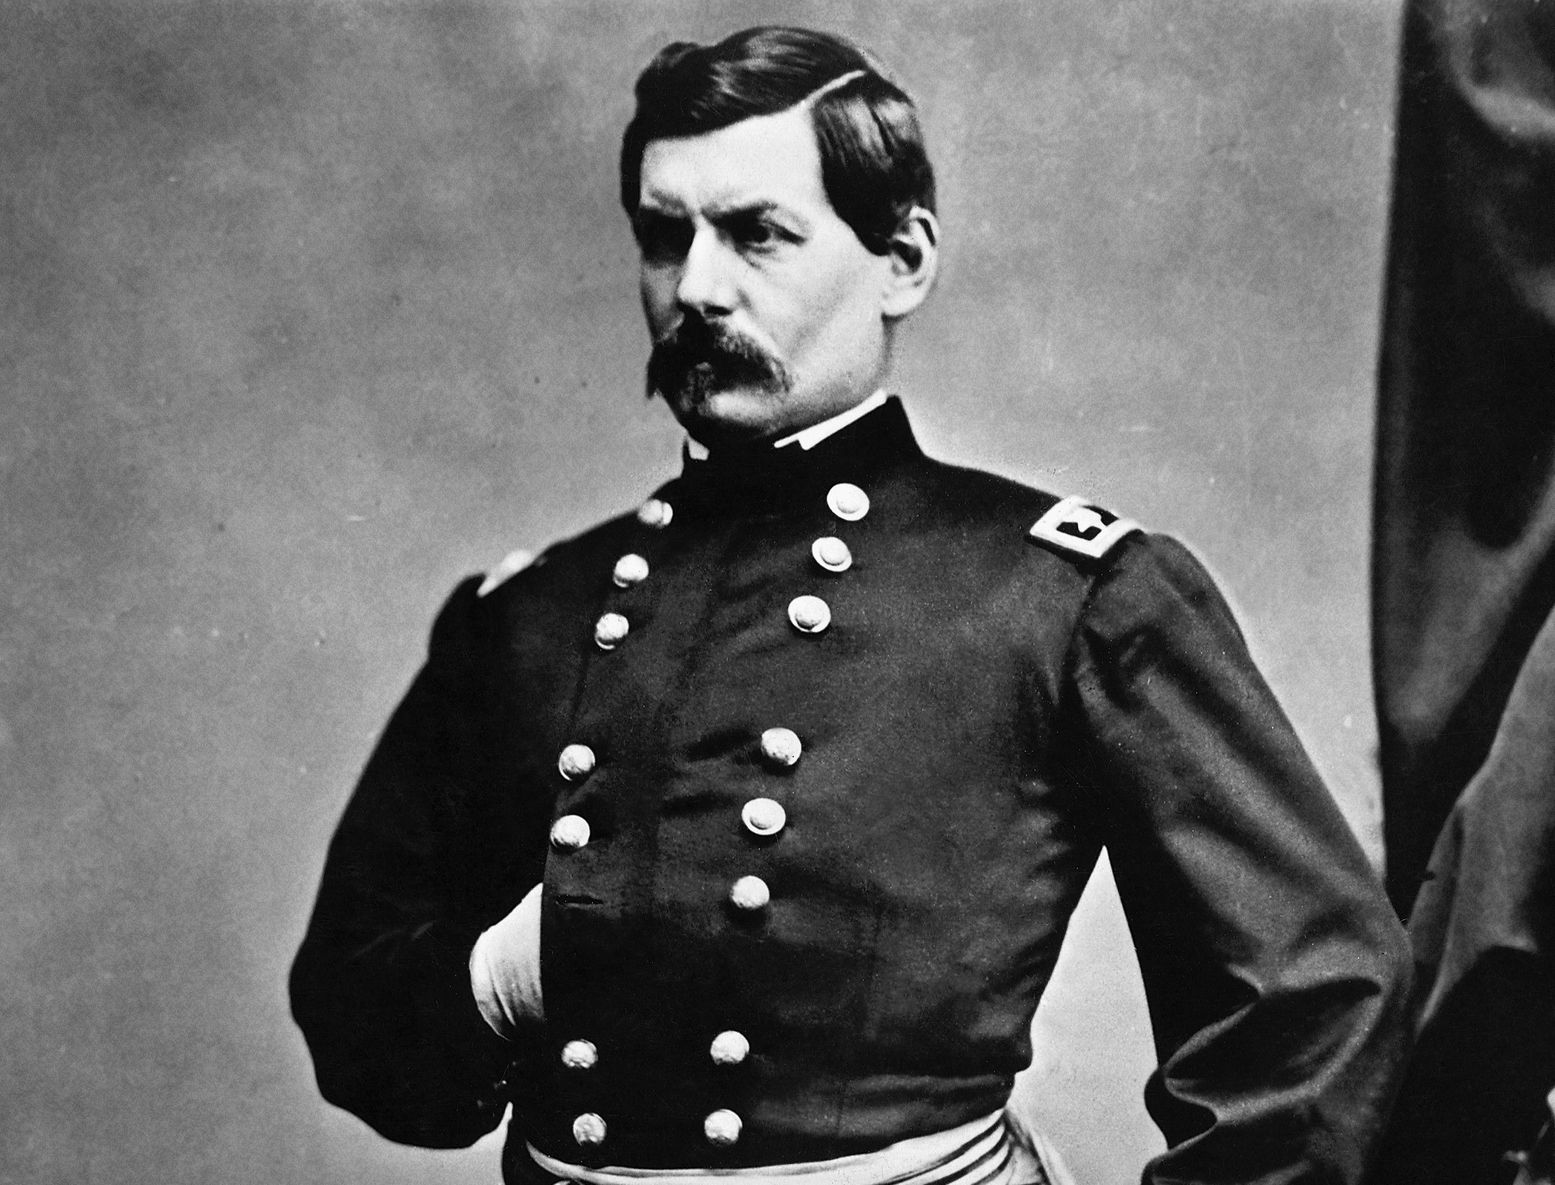 Union Civil War general and husband of Clara Pope